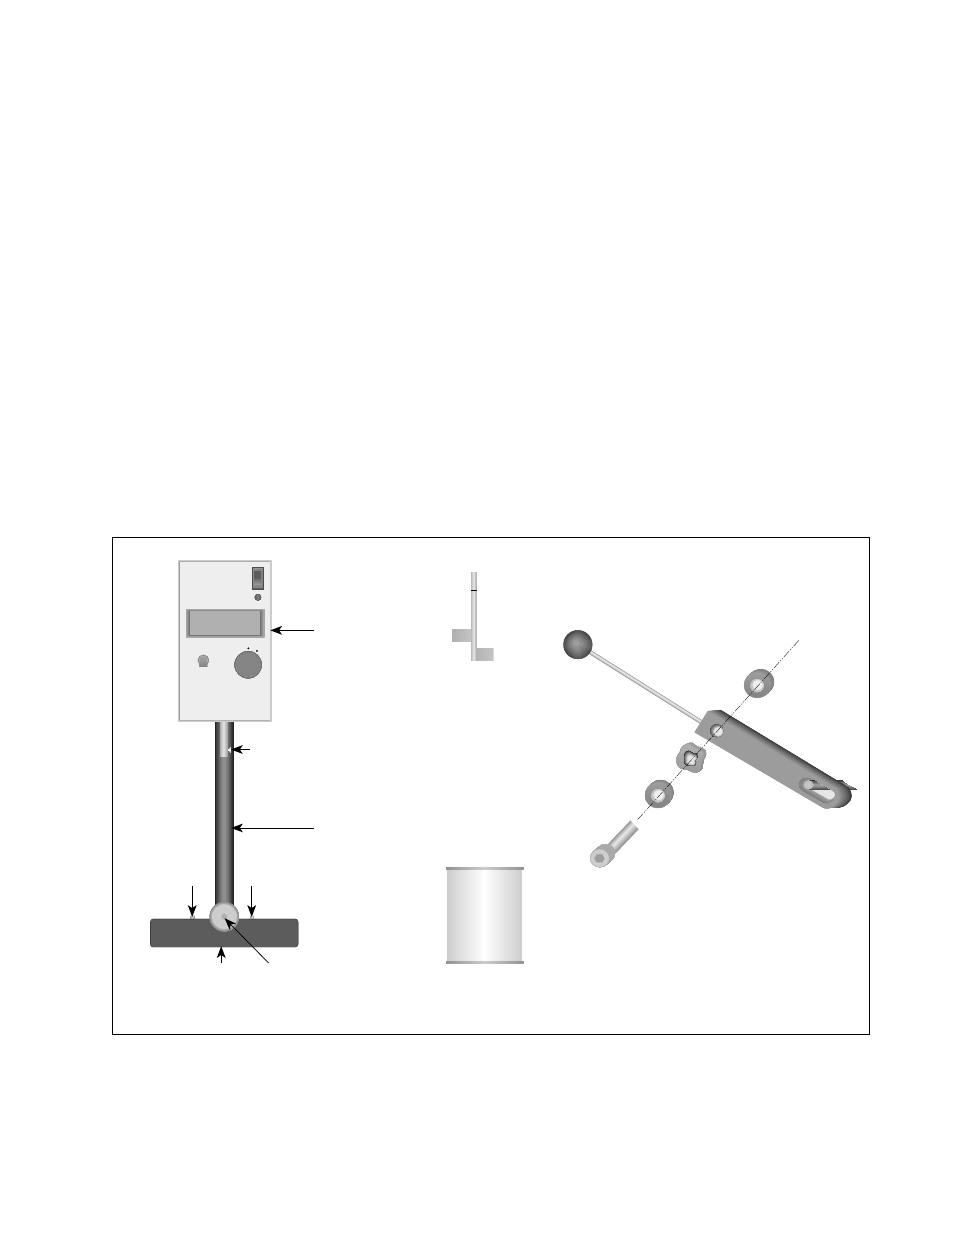 Brookfield Viscometer Spindle Conversion Chart